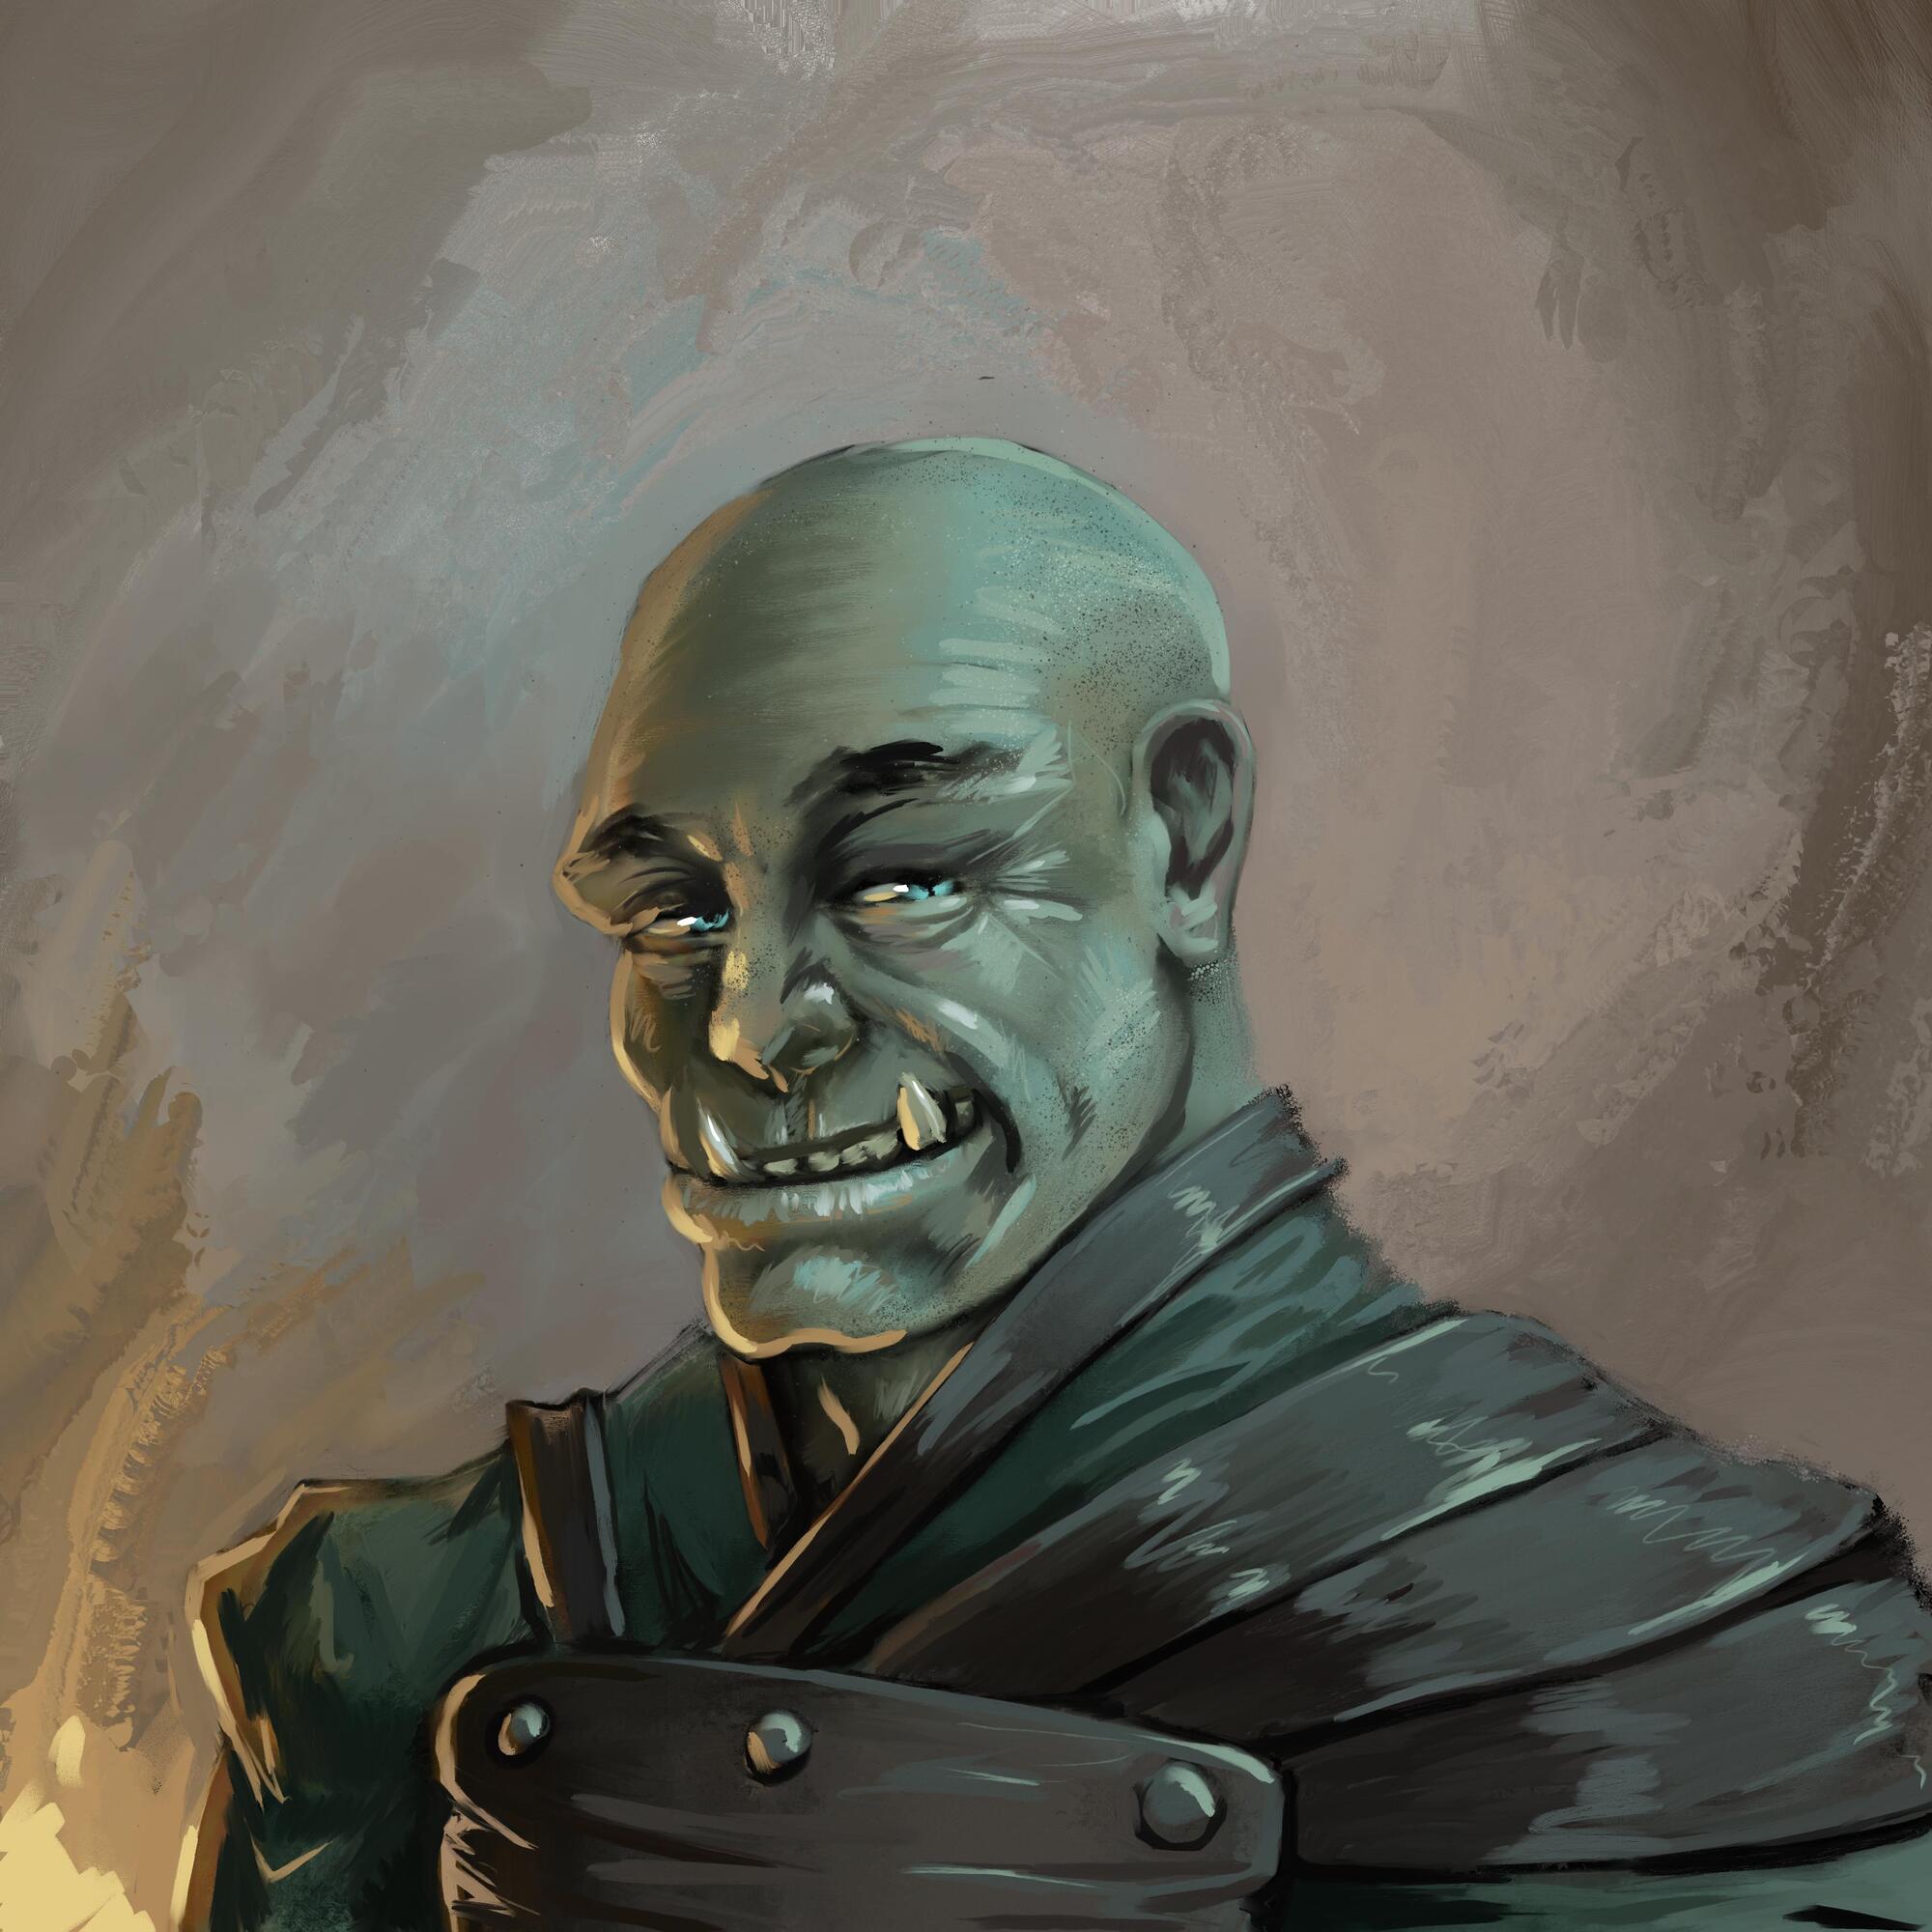 A half-orc painted in Corel Painter